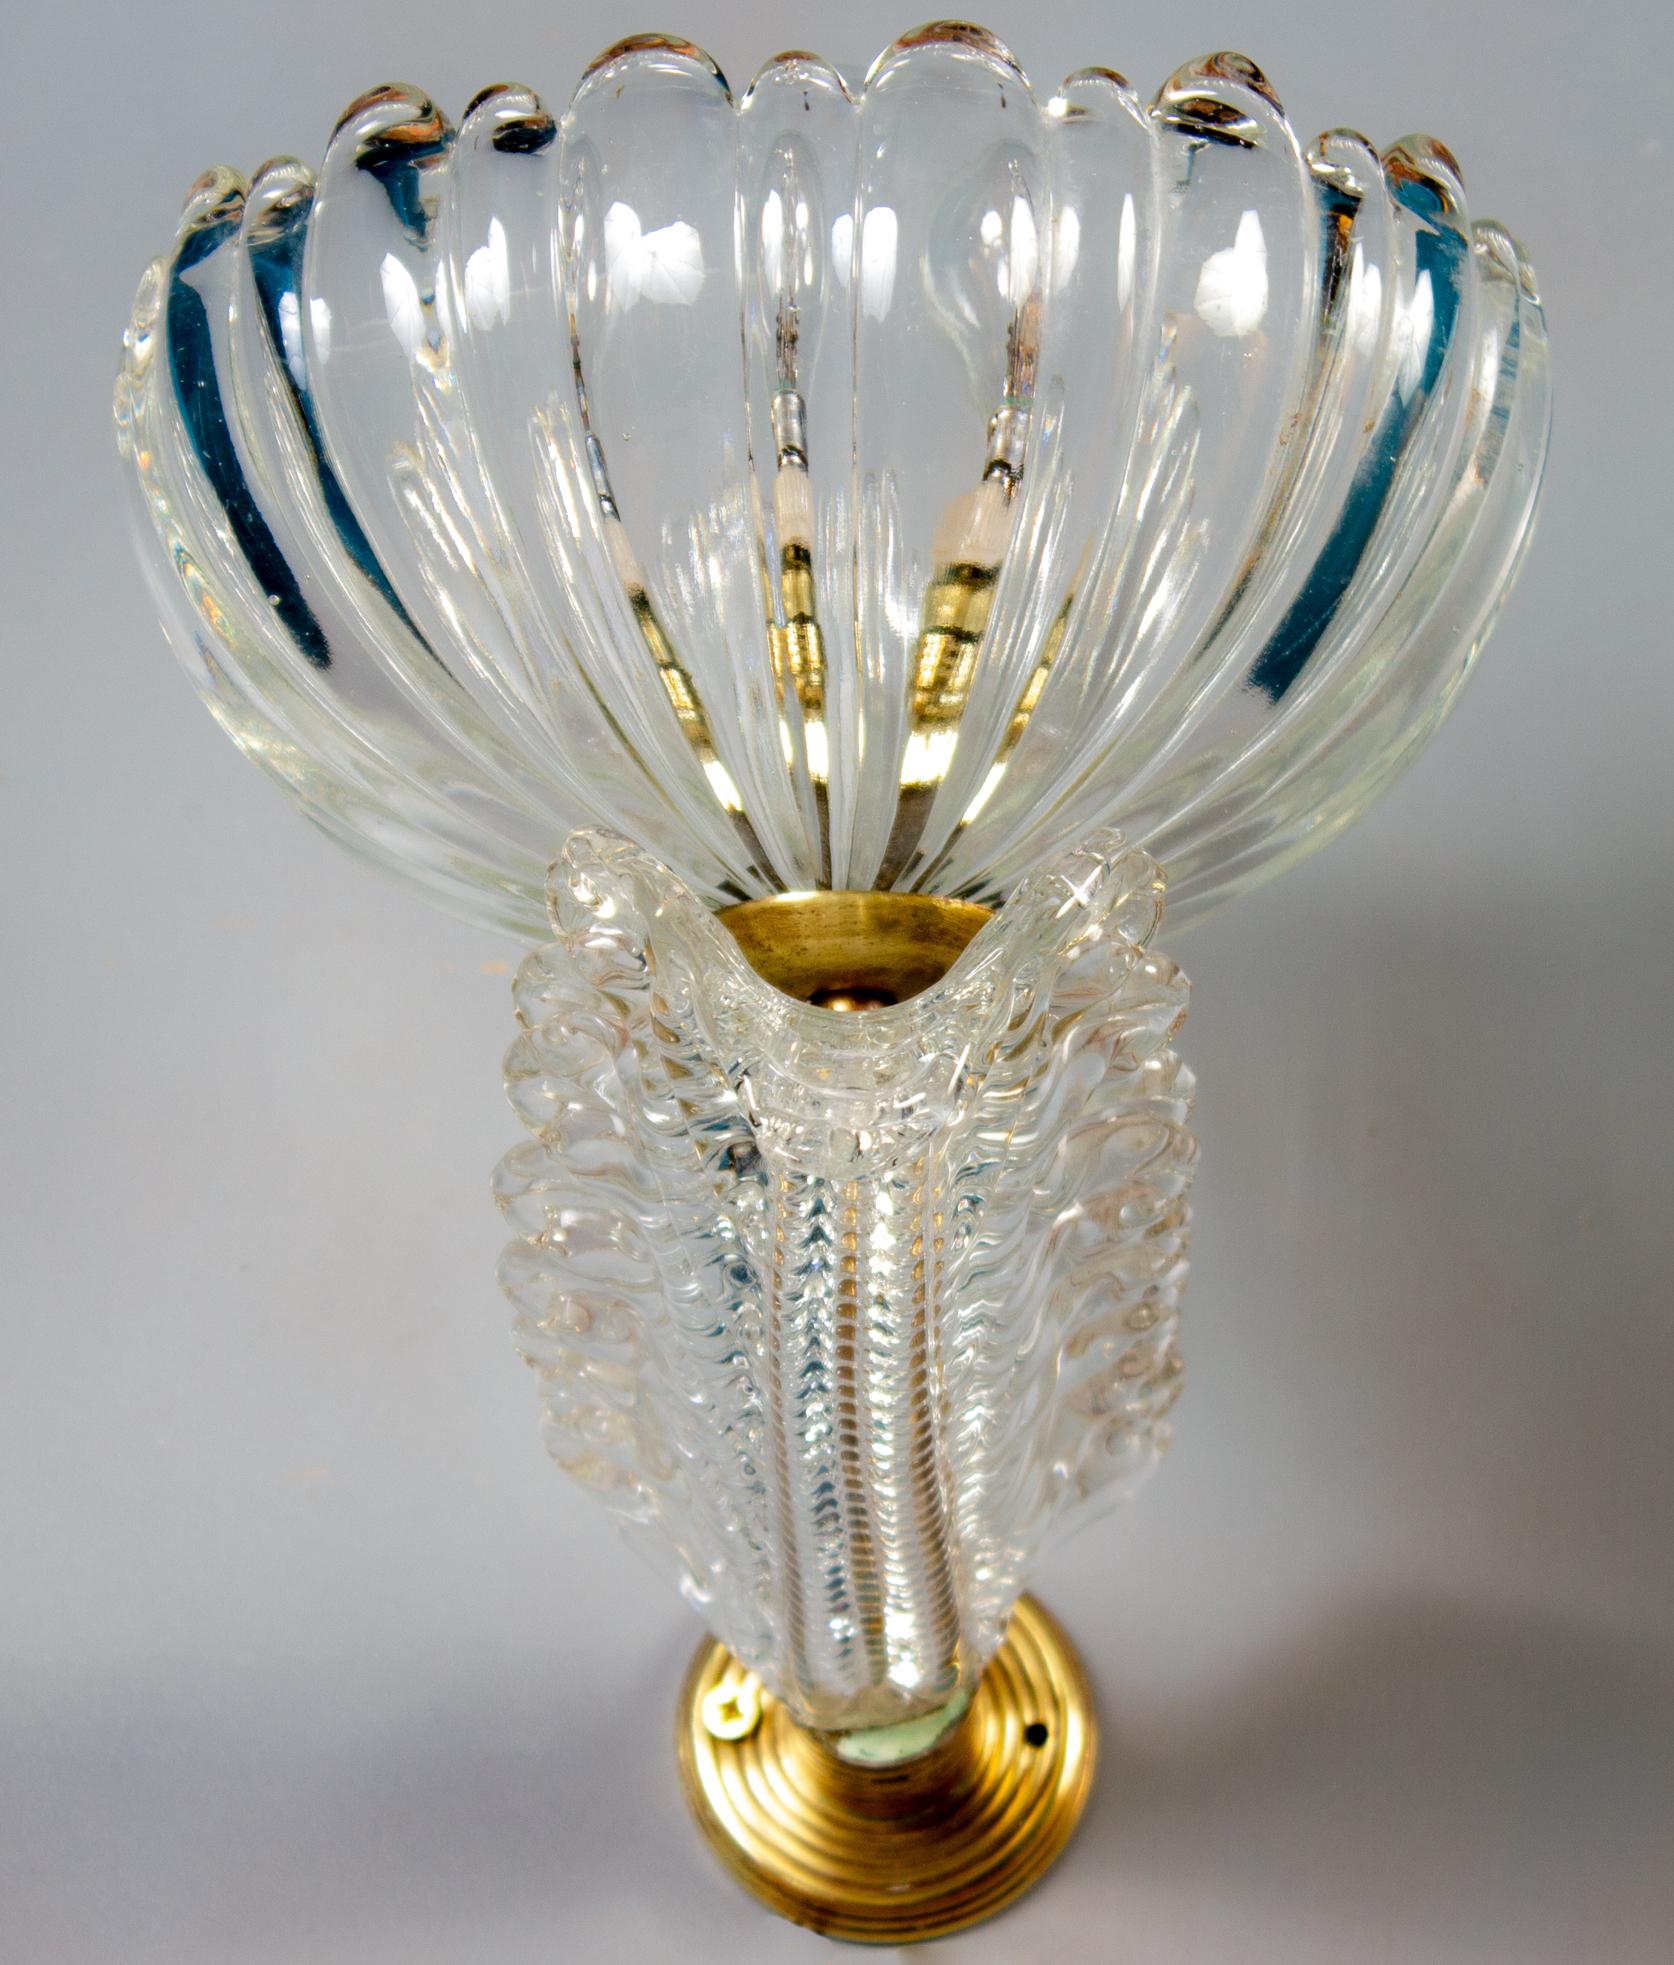 Pair of  Barovier Art Deco brass mounted Murano glass sconces or wall lights wit a precious hand blown Murano glass cup.

Each with 1 E 14 light bulb.